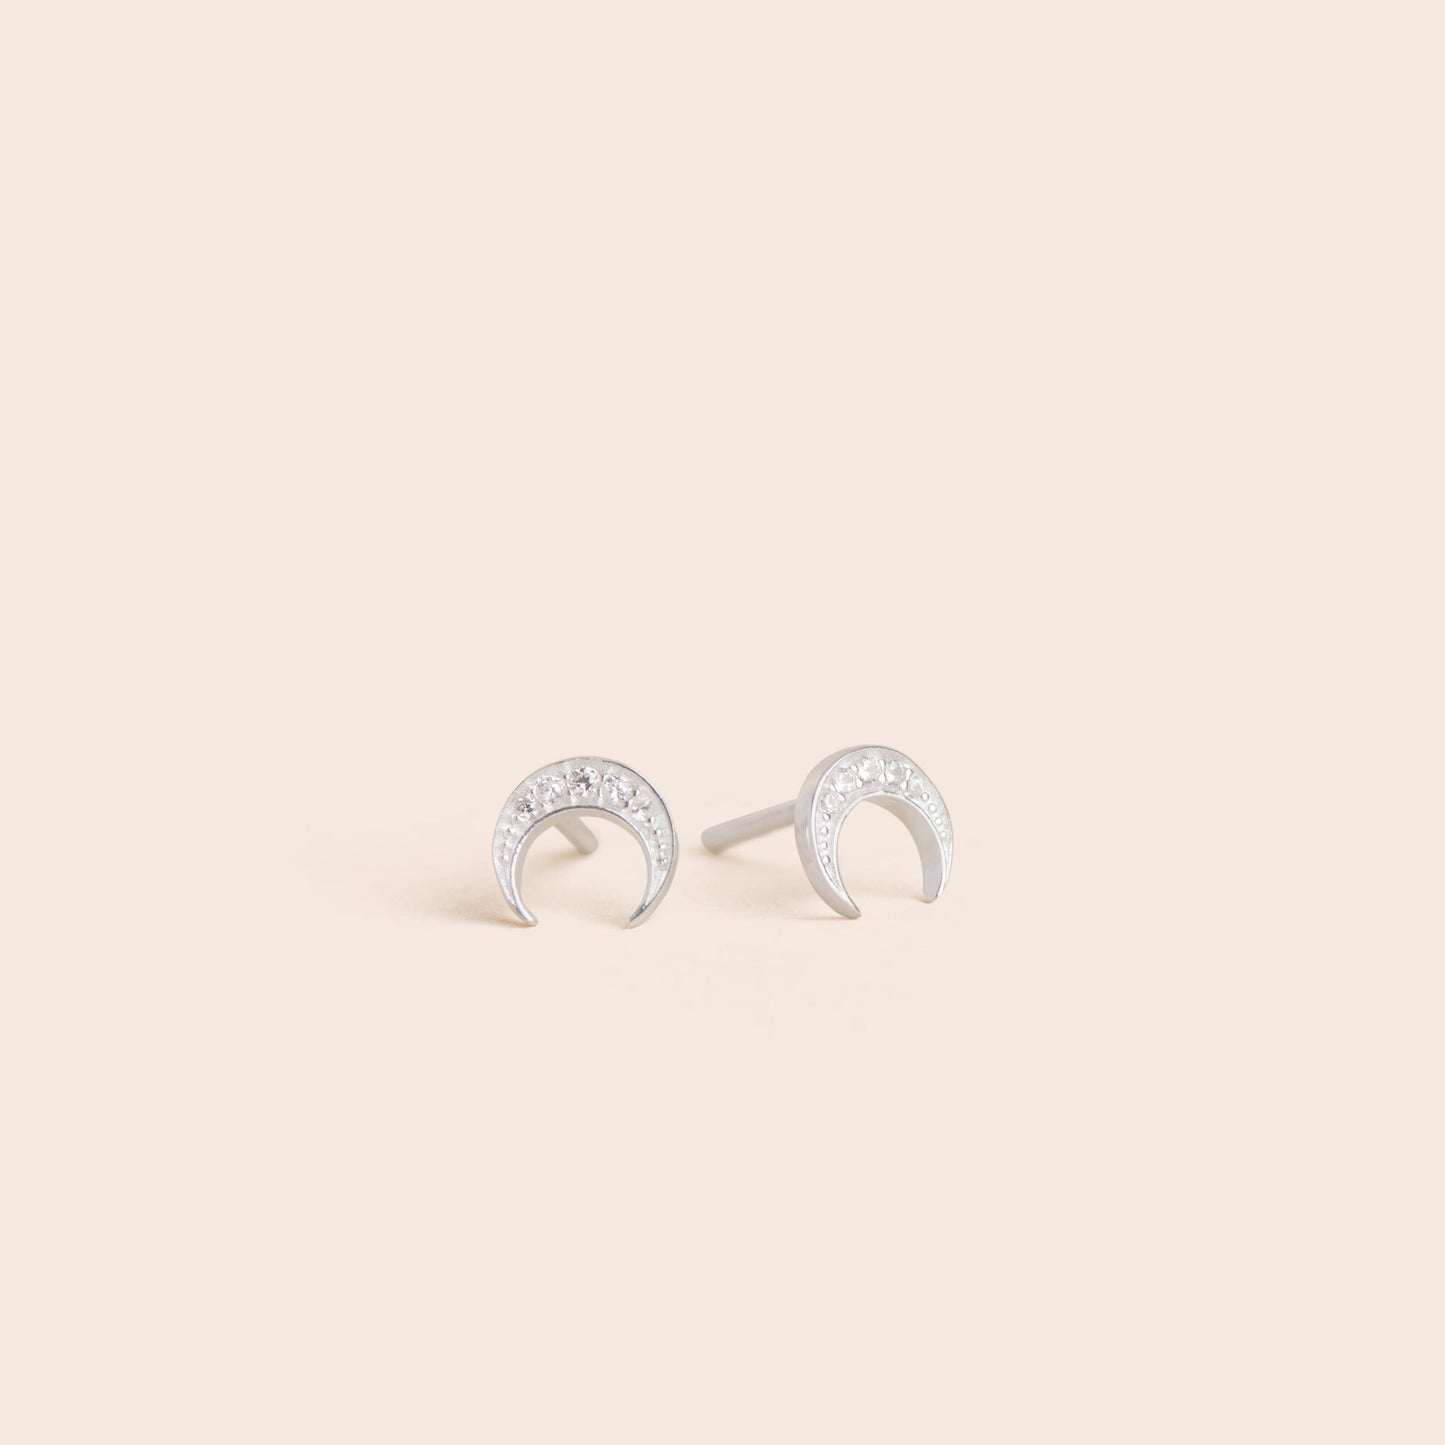 Silver Crescent Moon Phase Stud Earrings - Gemlet